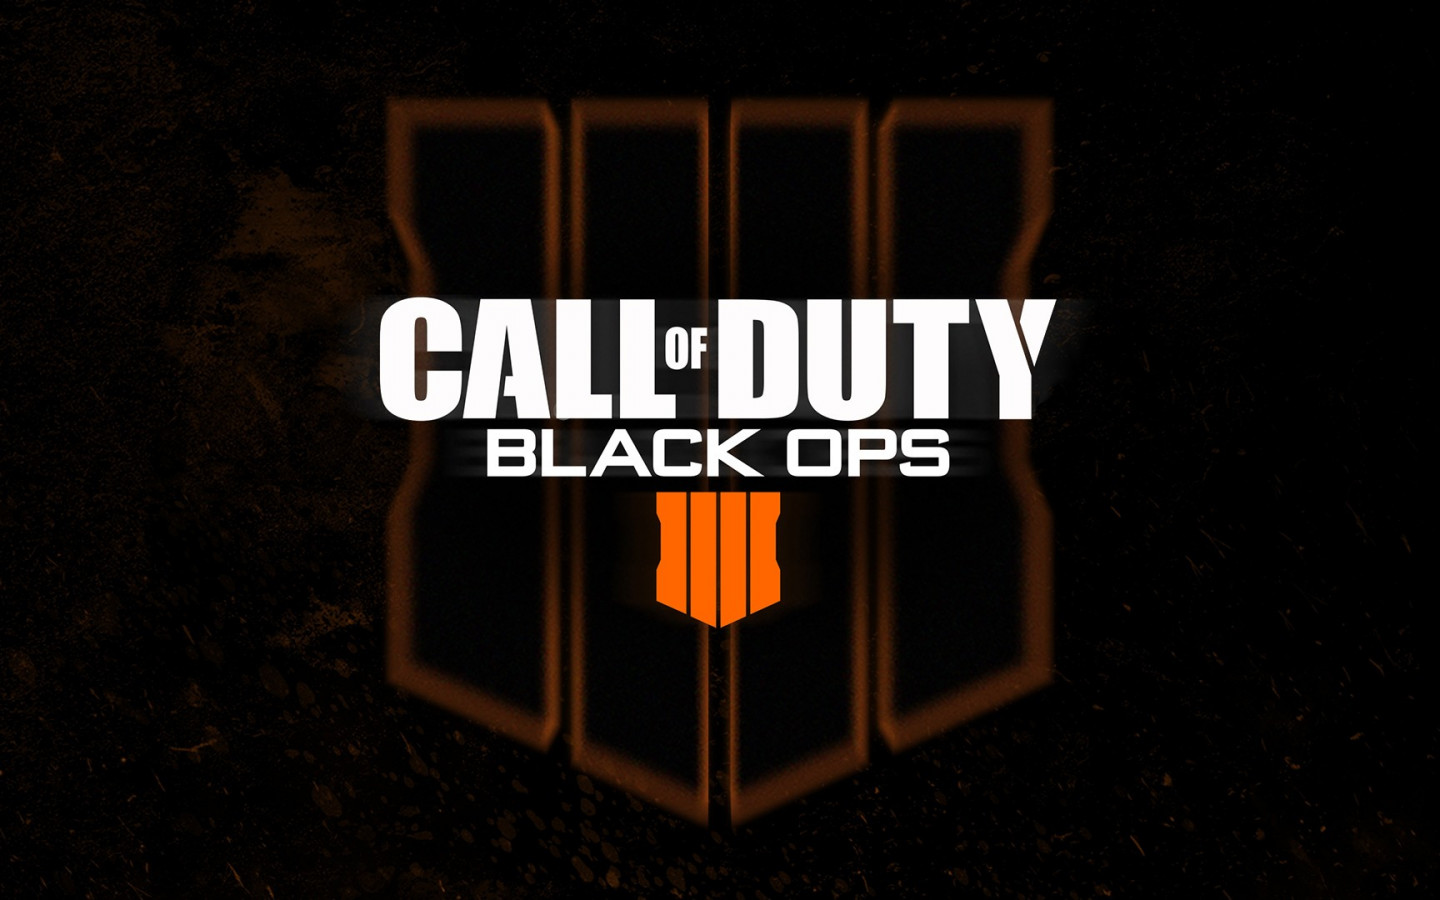 Call of Duty Black Ops 4 reveal wallpaper 1440x900